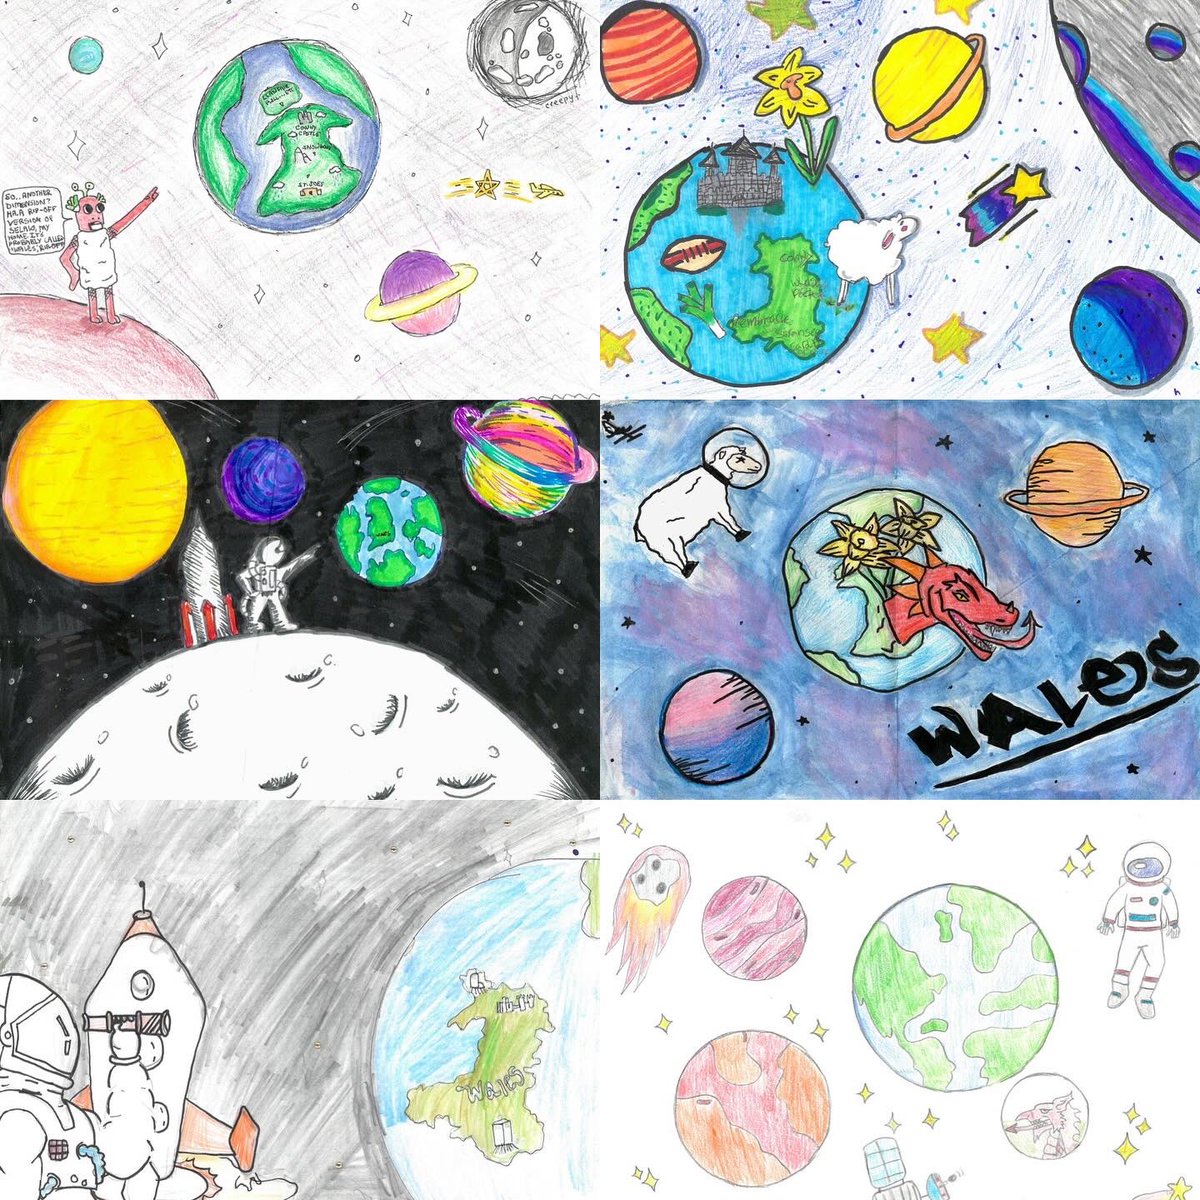 Year 8 #Eistedddod Art competition winners created these pieces of Wales from Space 🚀 @stjosephscomp 
Winners:
1st - Kieran Acayan
2nd - Erin Manlongat
3rd - Izabella Hanford
Runners up:
Kylene Macalino
Eve Clunis-Wheway
Shania Mighten
Kara Clunis
Maya Lecca
Sofia Greenway